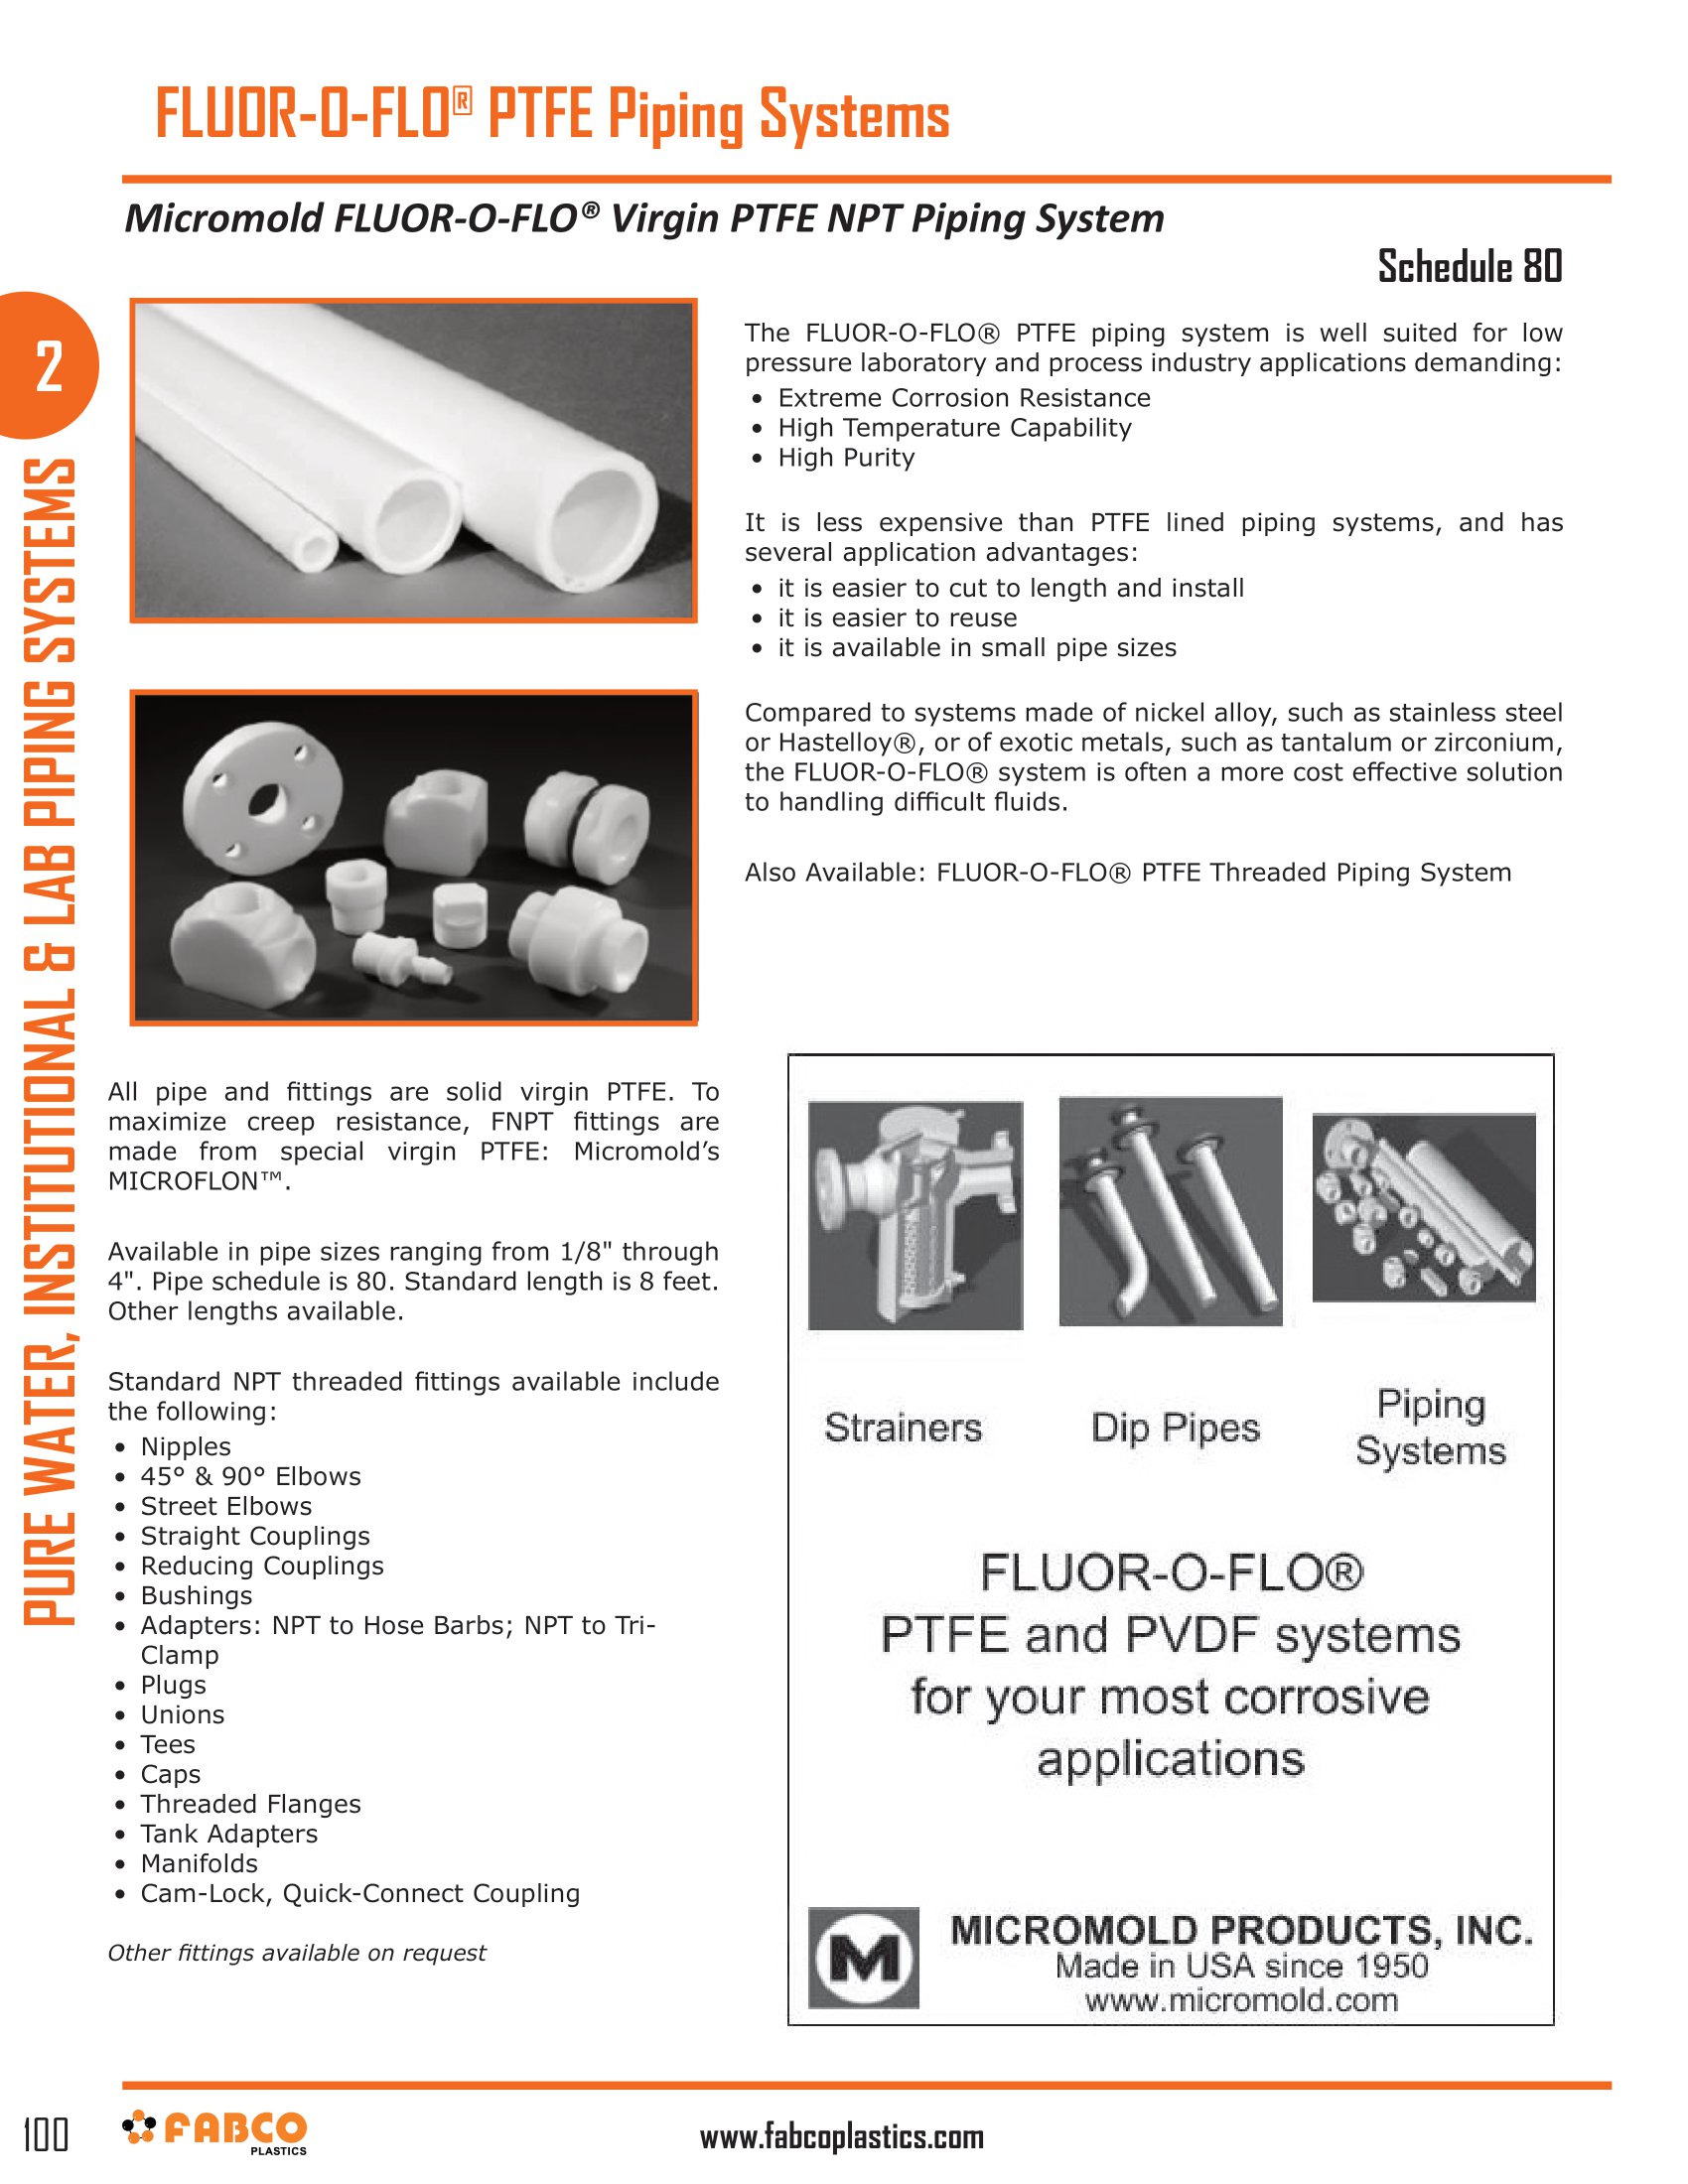 FLUOR-O-FLO® PTFE Piping Systems And Accessories